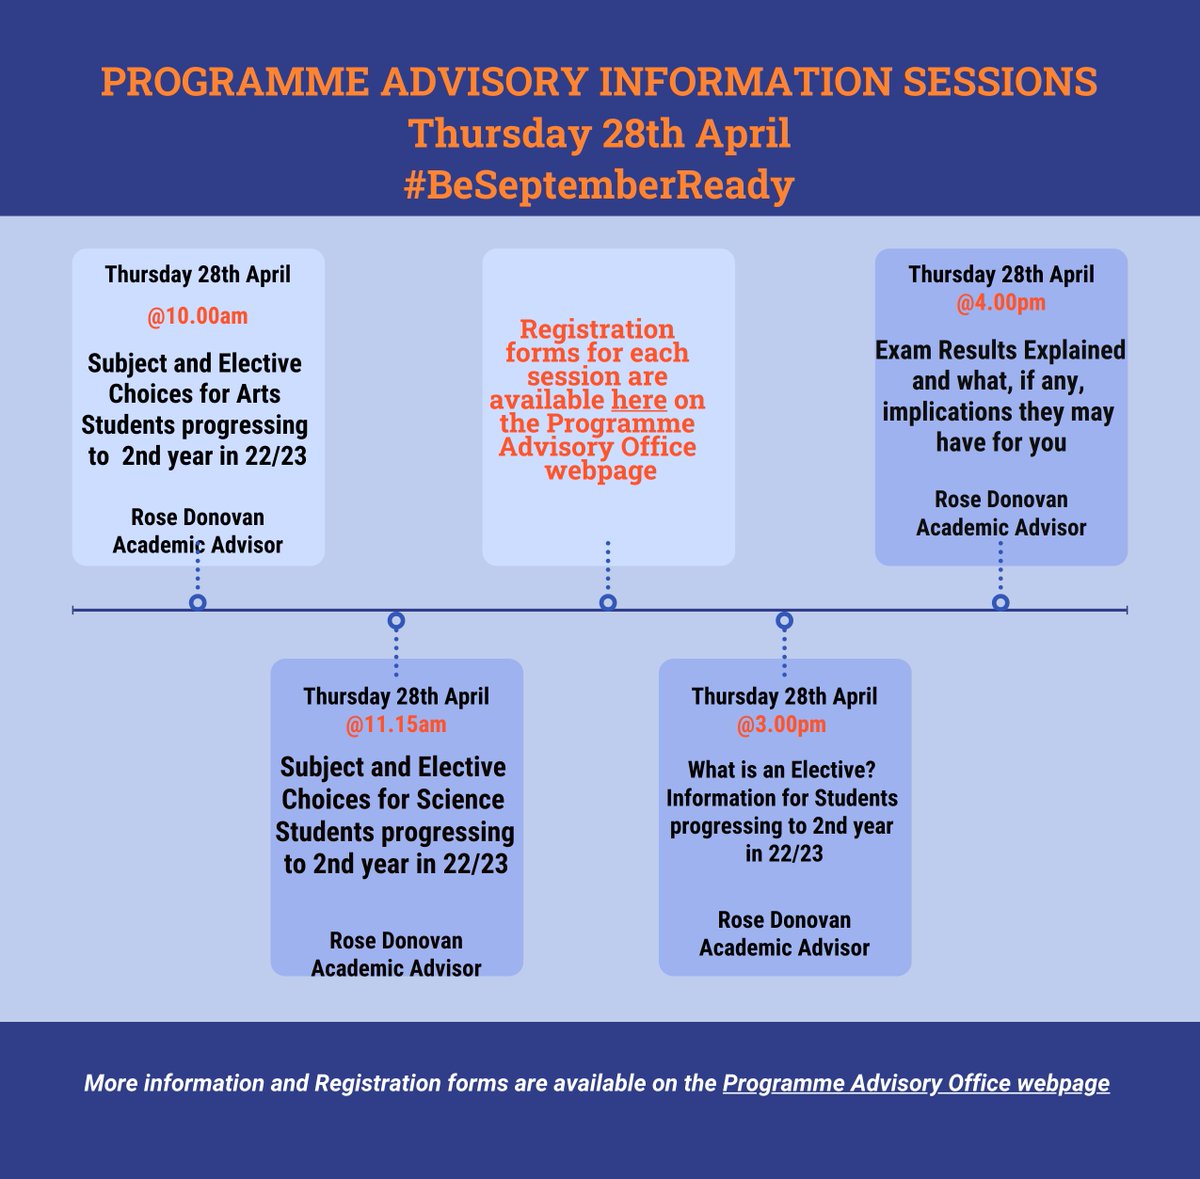 Programme Advisory Information Sessions coming up this week! #BeSeptemberReady